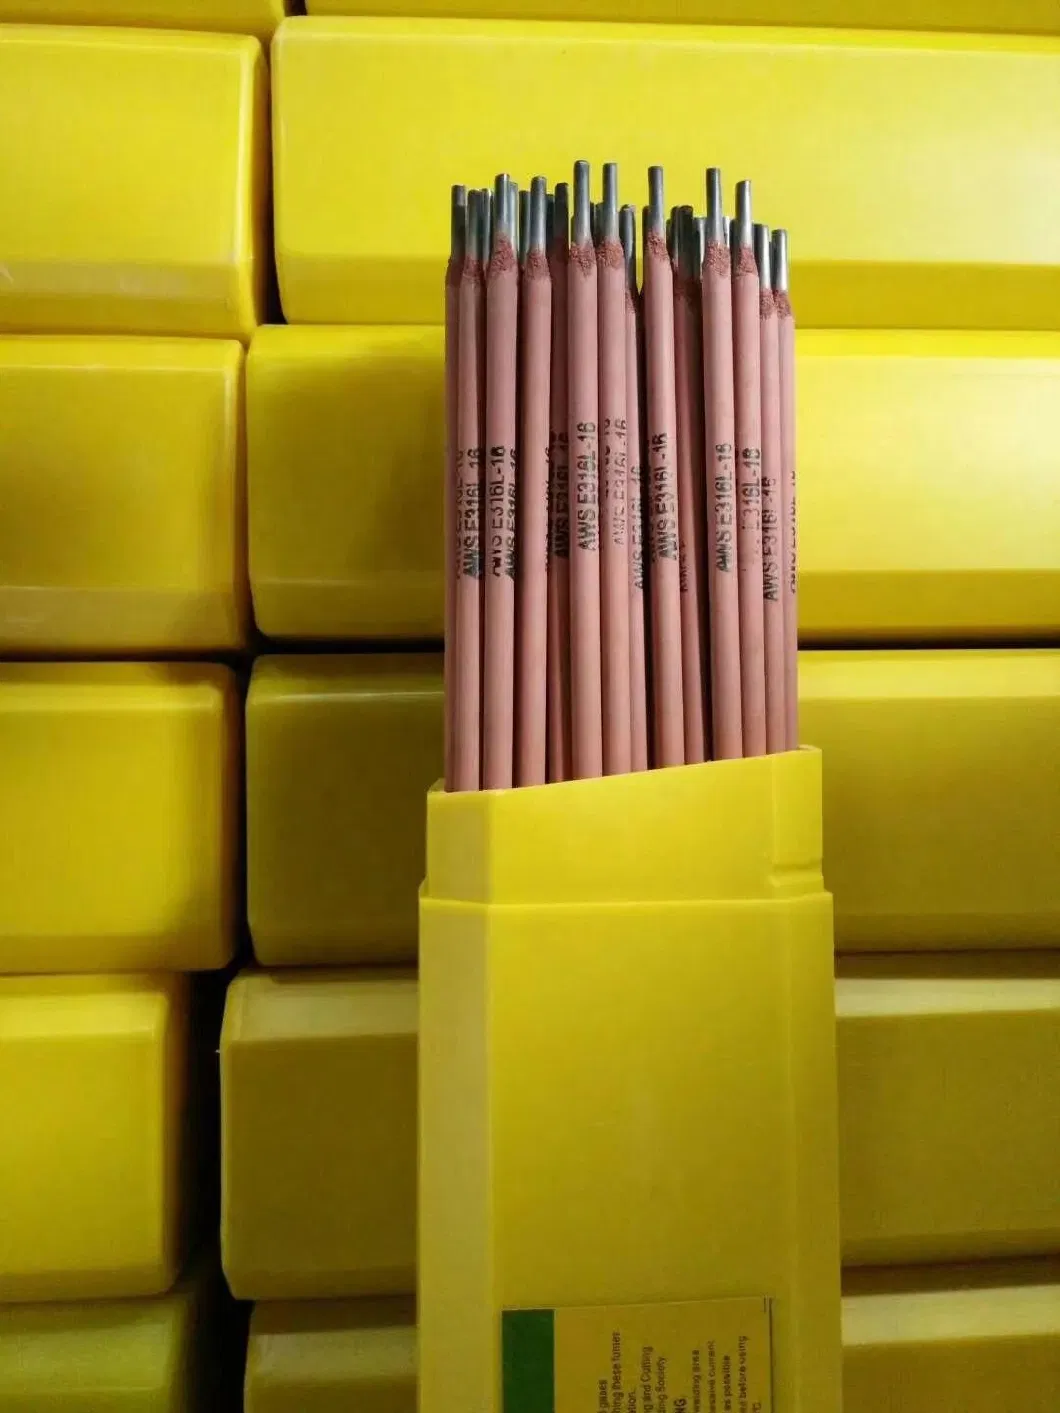 China Factory Stainless Steel Welding Stick Electrode Aws E310-16 2.5/3.2/4.0 mm